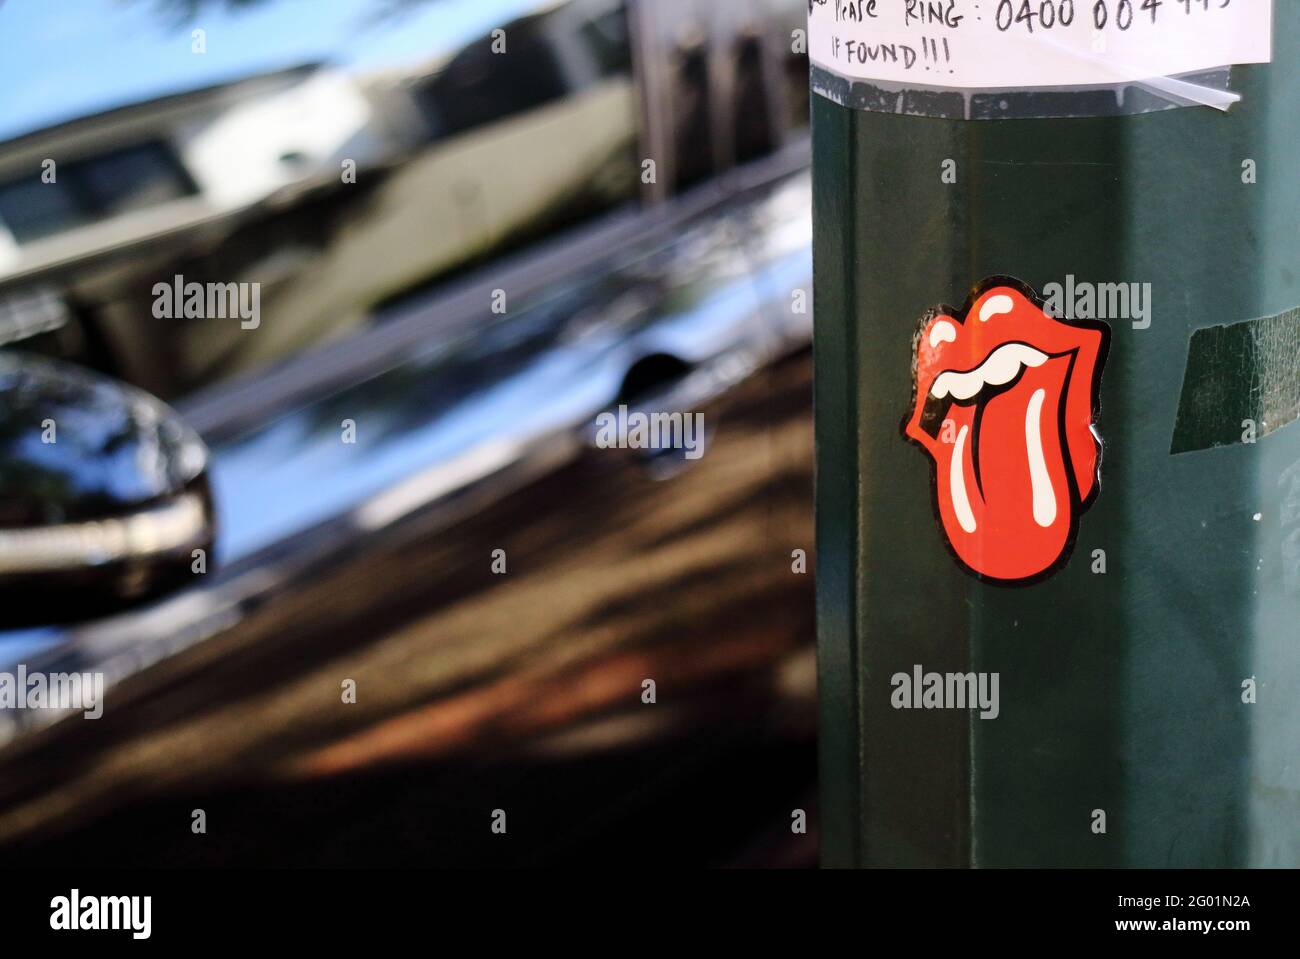 Rolling Stones Tongue and Lip logo sticker designed by John Pasche attached to a lamp pole with a car passing by in Brisbane Australia. Stock Photo